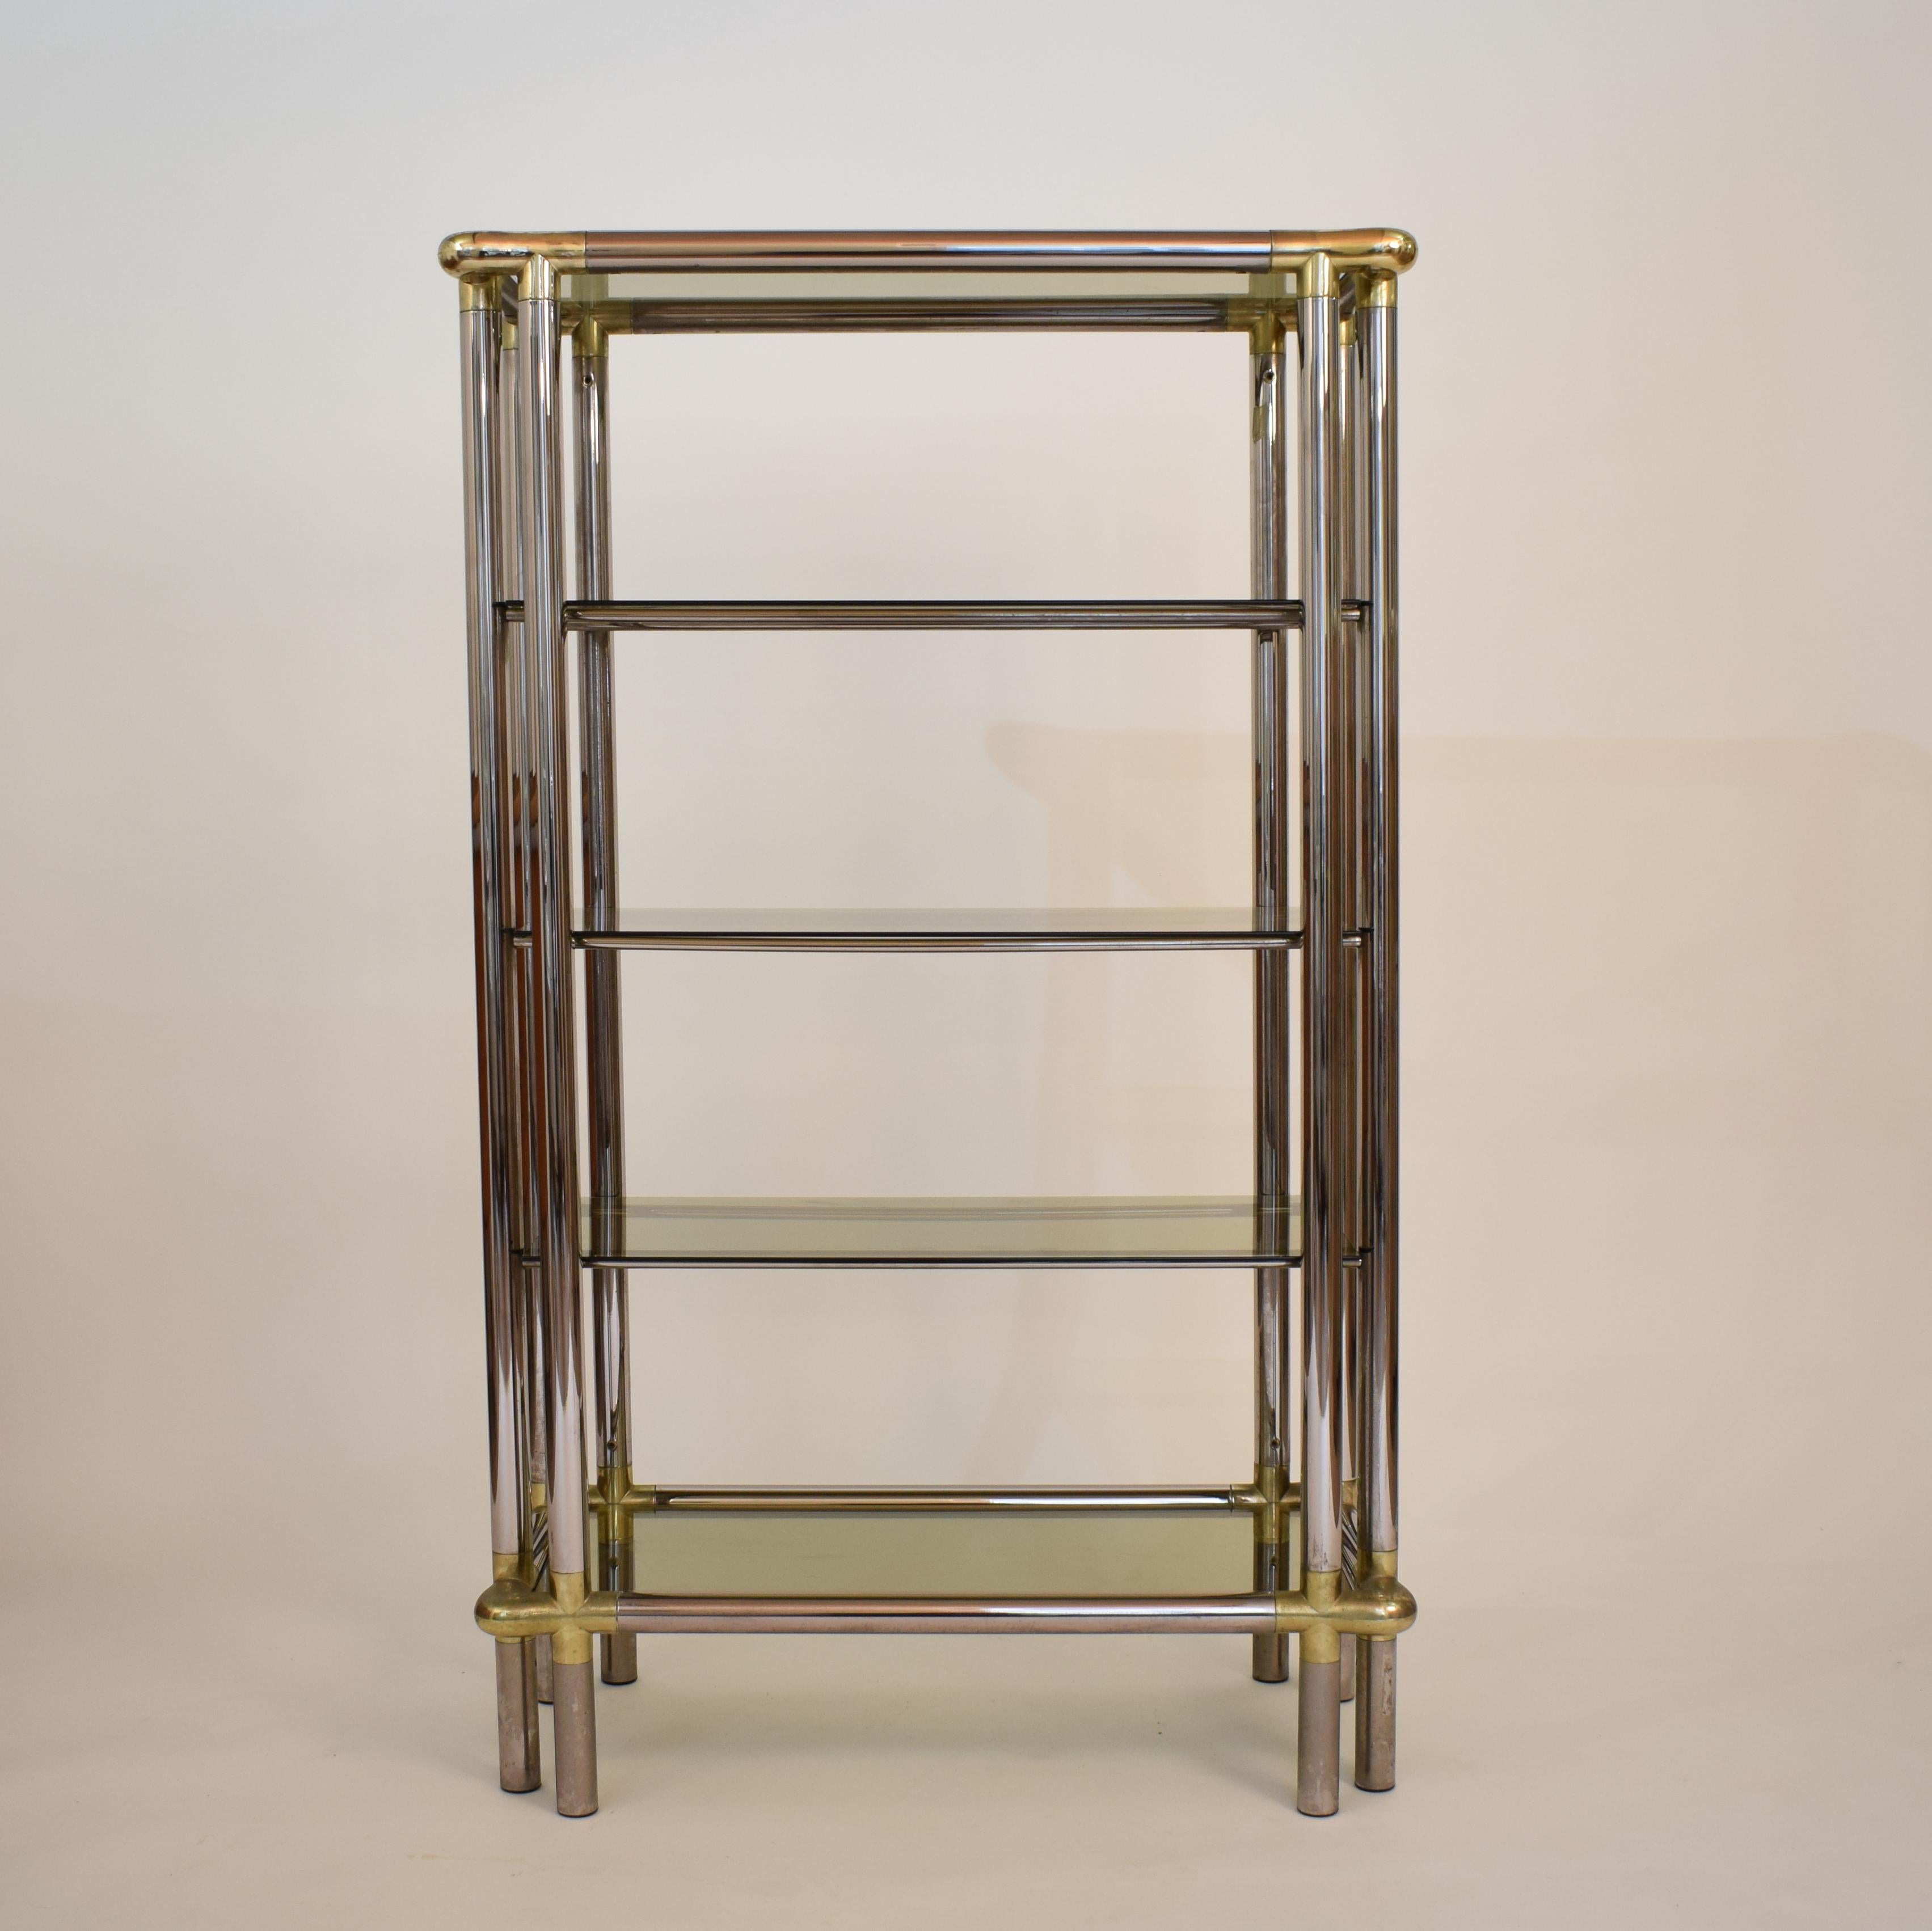 This beautiful Mid-Century Hollywood Regency display glass shelf was made in France in the 1970s.
It is made in high quality. The étagère with the chrome tubes and brass corners are fitting elegant together.
A wonderful piece of furniture for a